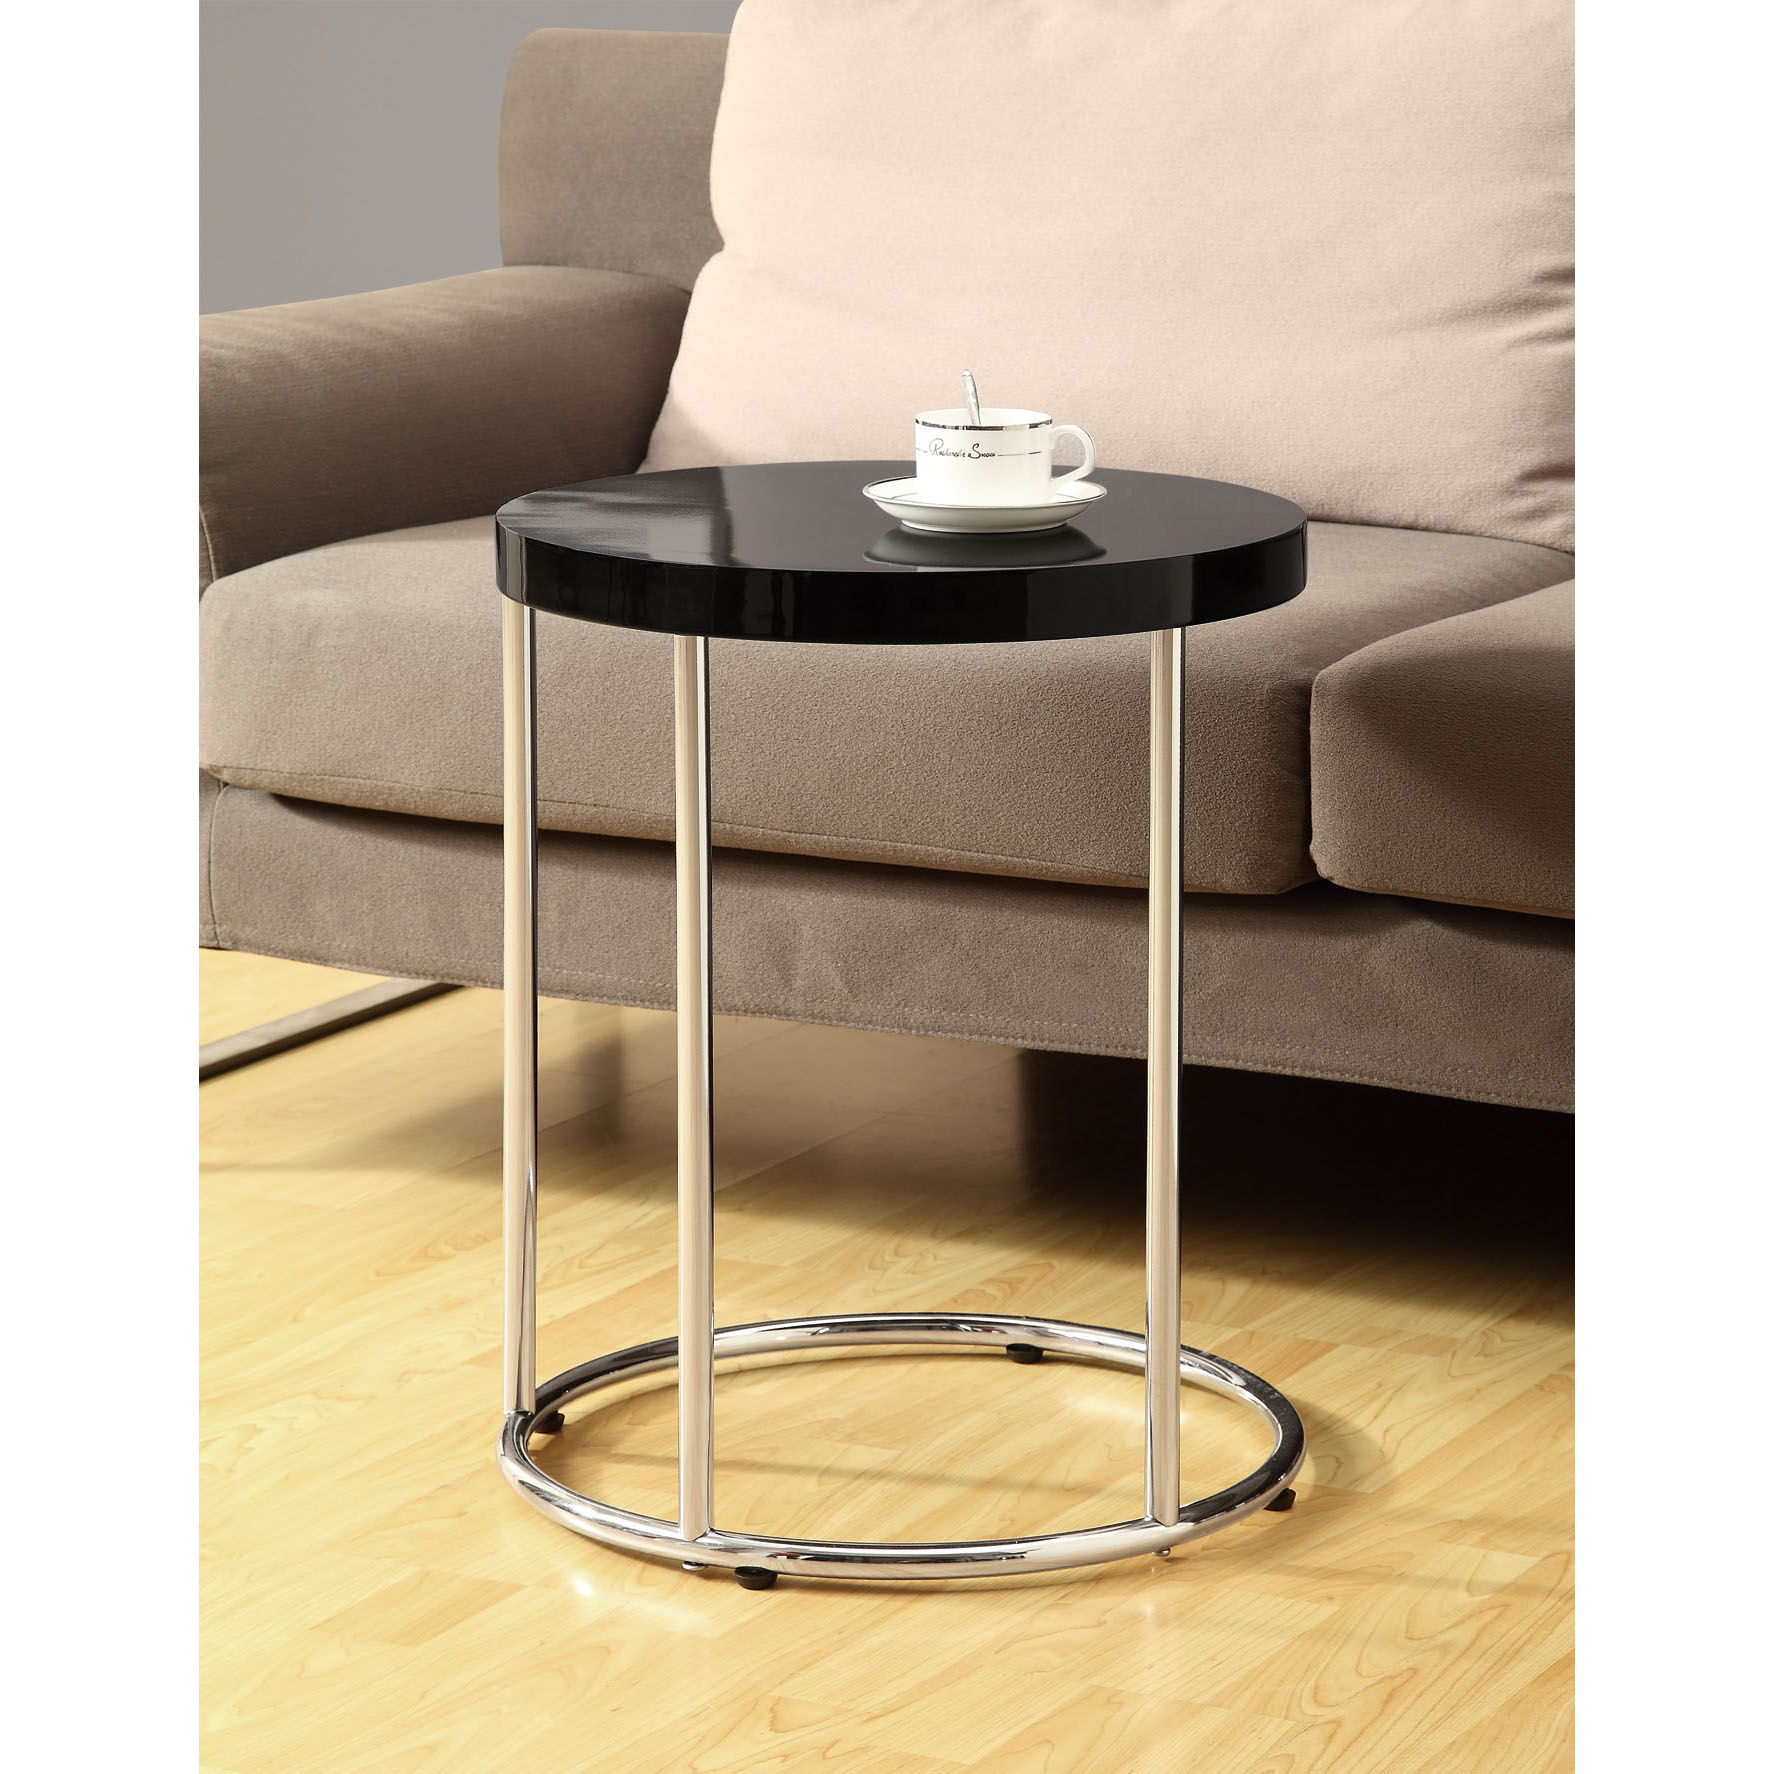 design metal accent table with cabinets contemporary elegant glossy black chrome free shipping today outdoor drum patio dining sets target changing wichita furniture grey